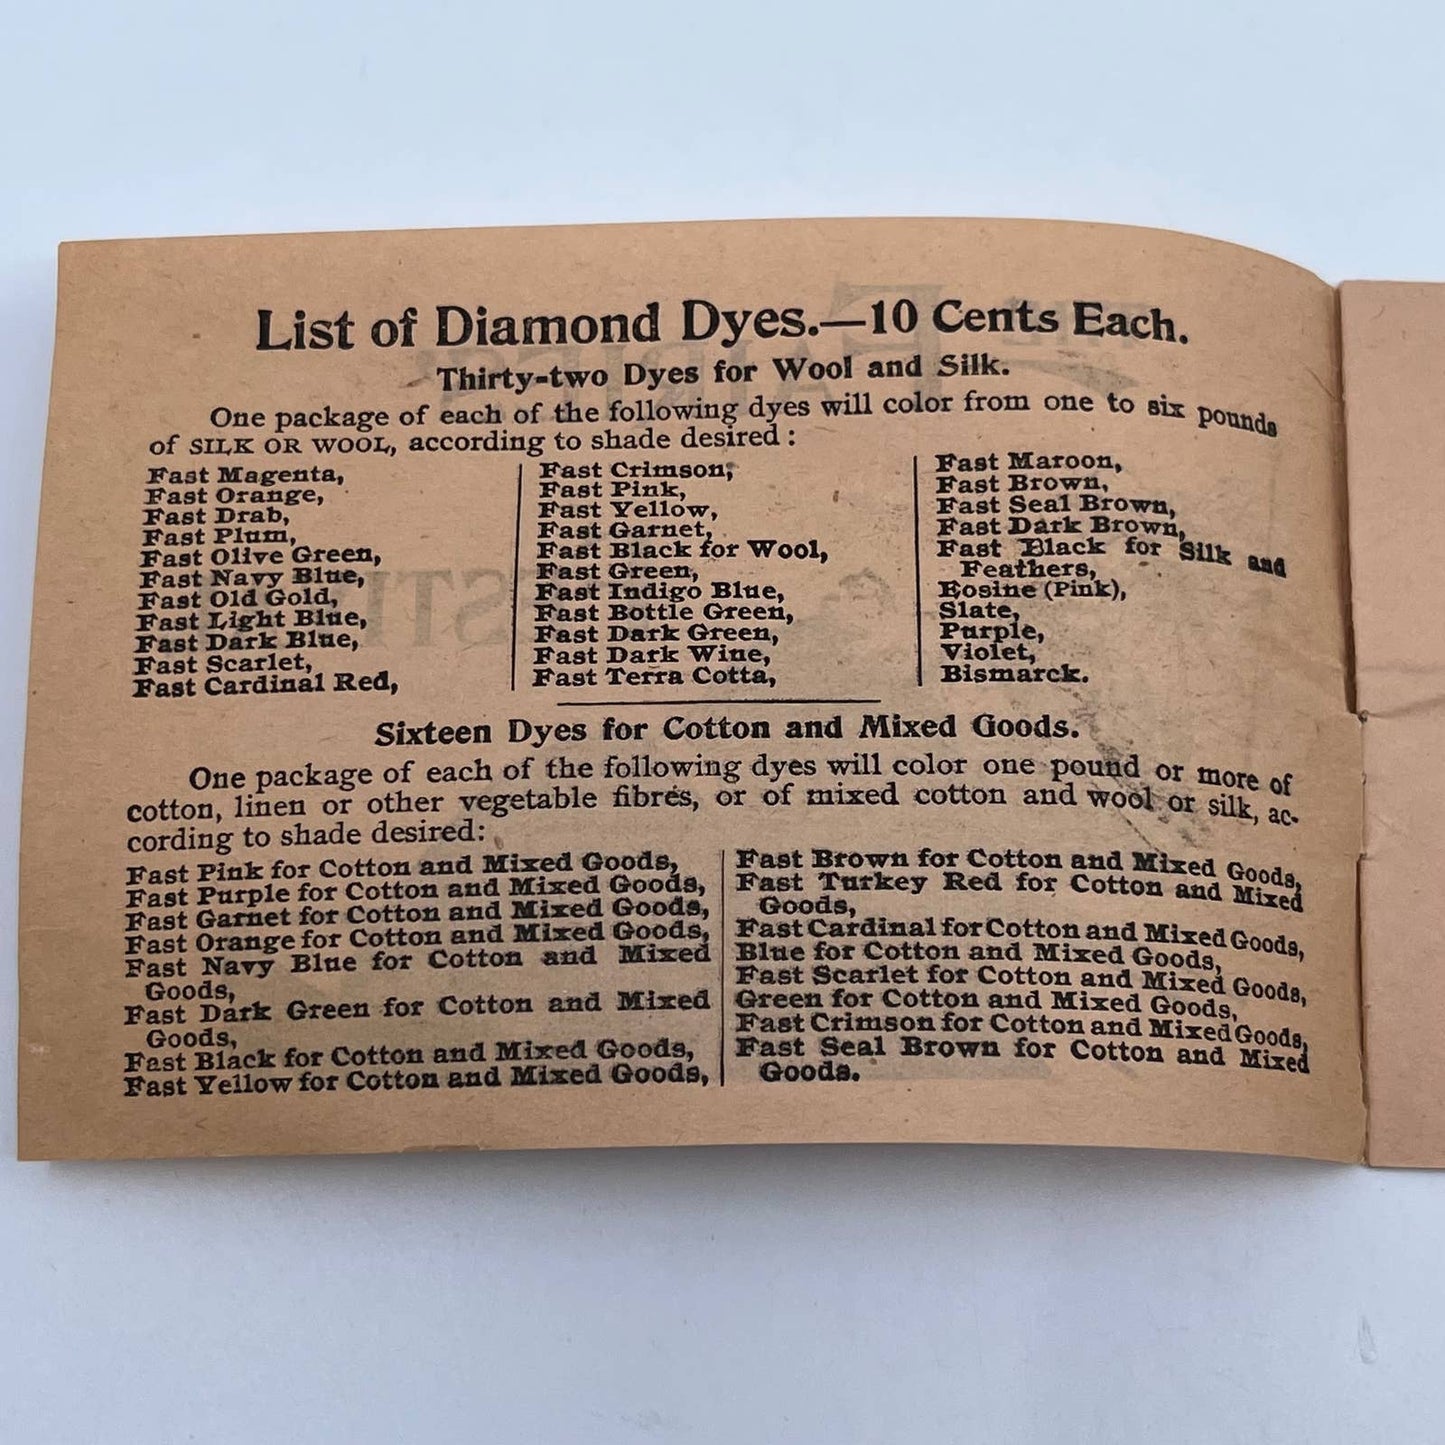 c1910 Diamond Dyes Advertising Booklet The Faries' Festival AC1